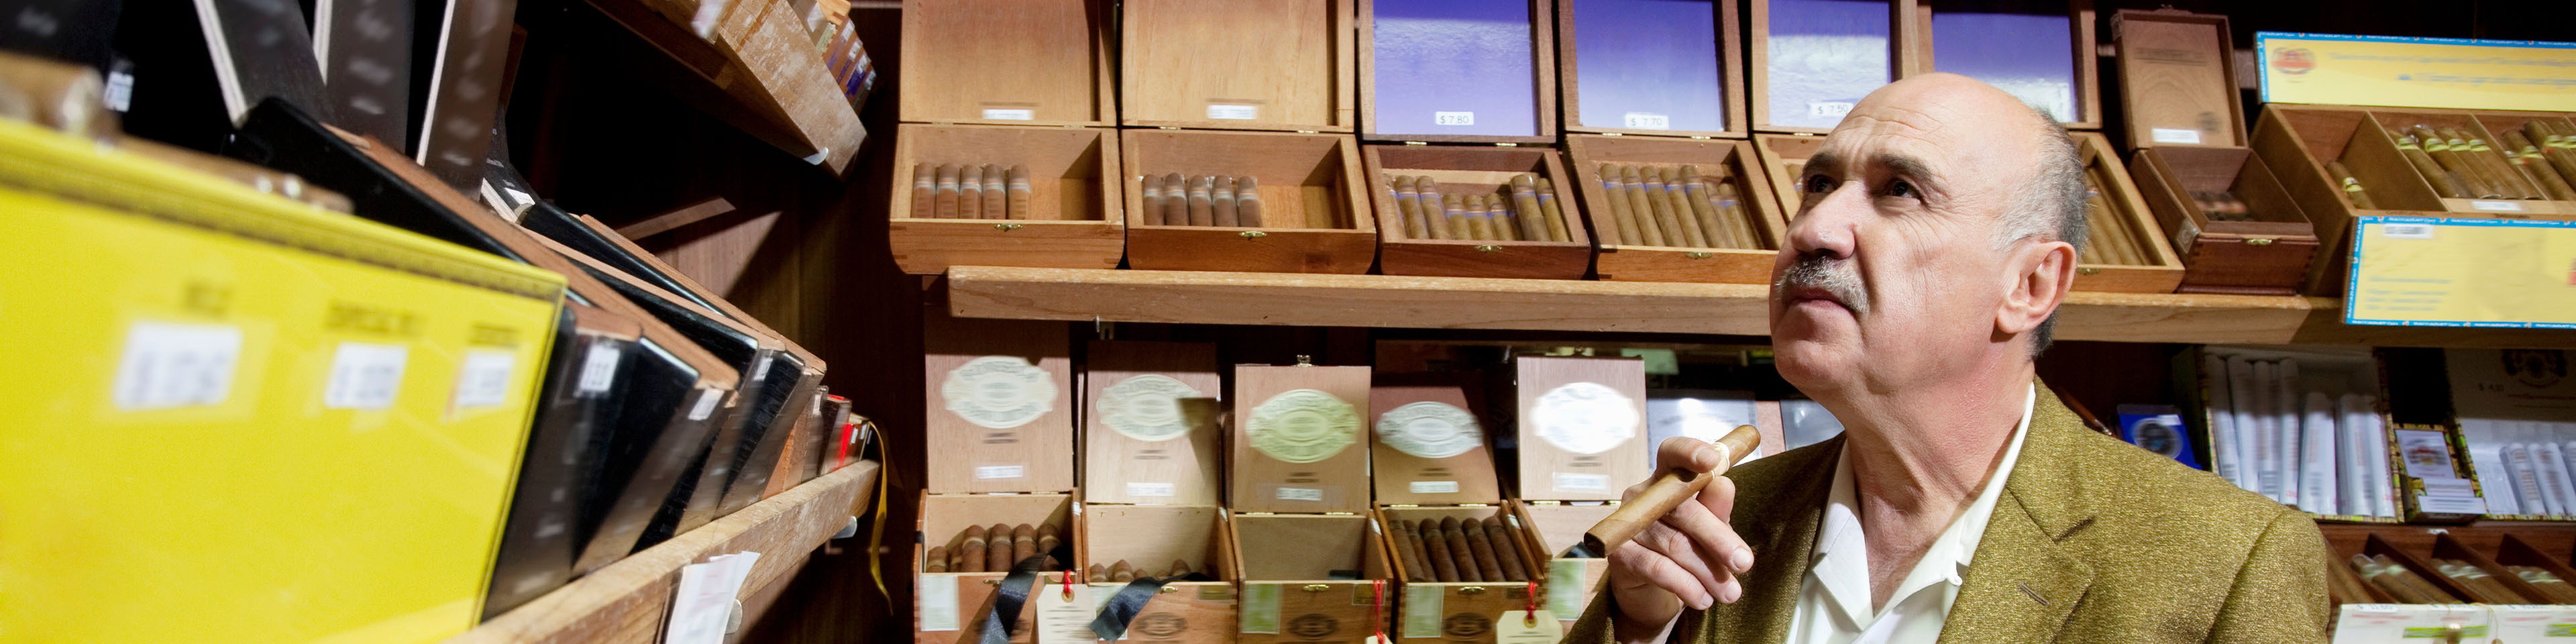 California Business Licenses to sell cigar wraps